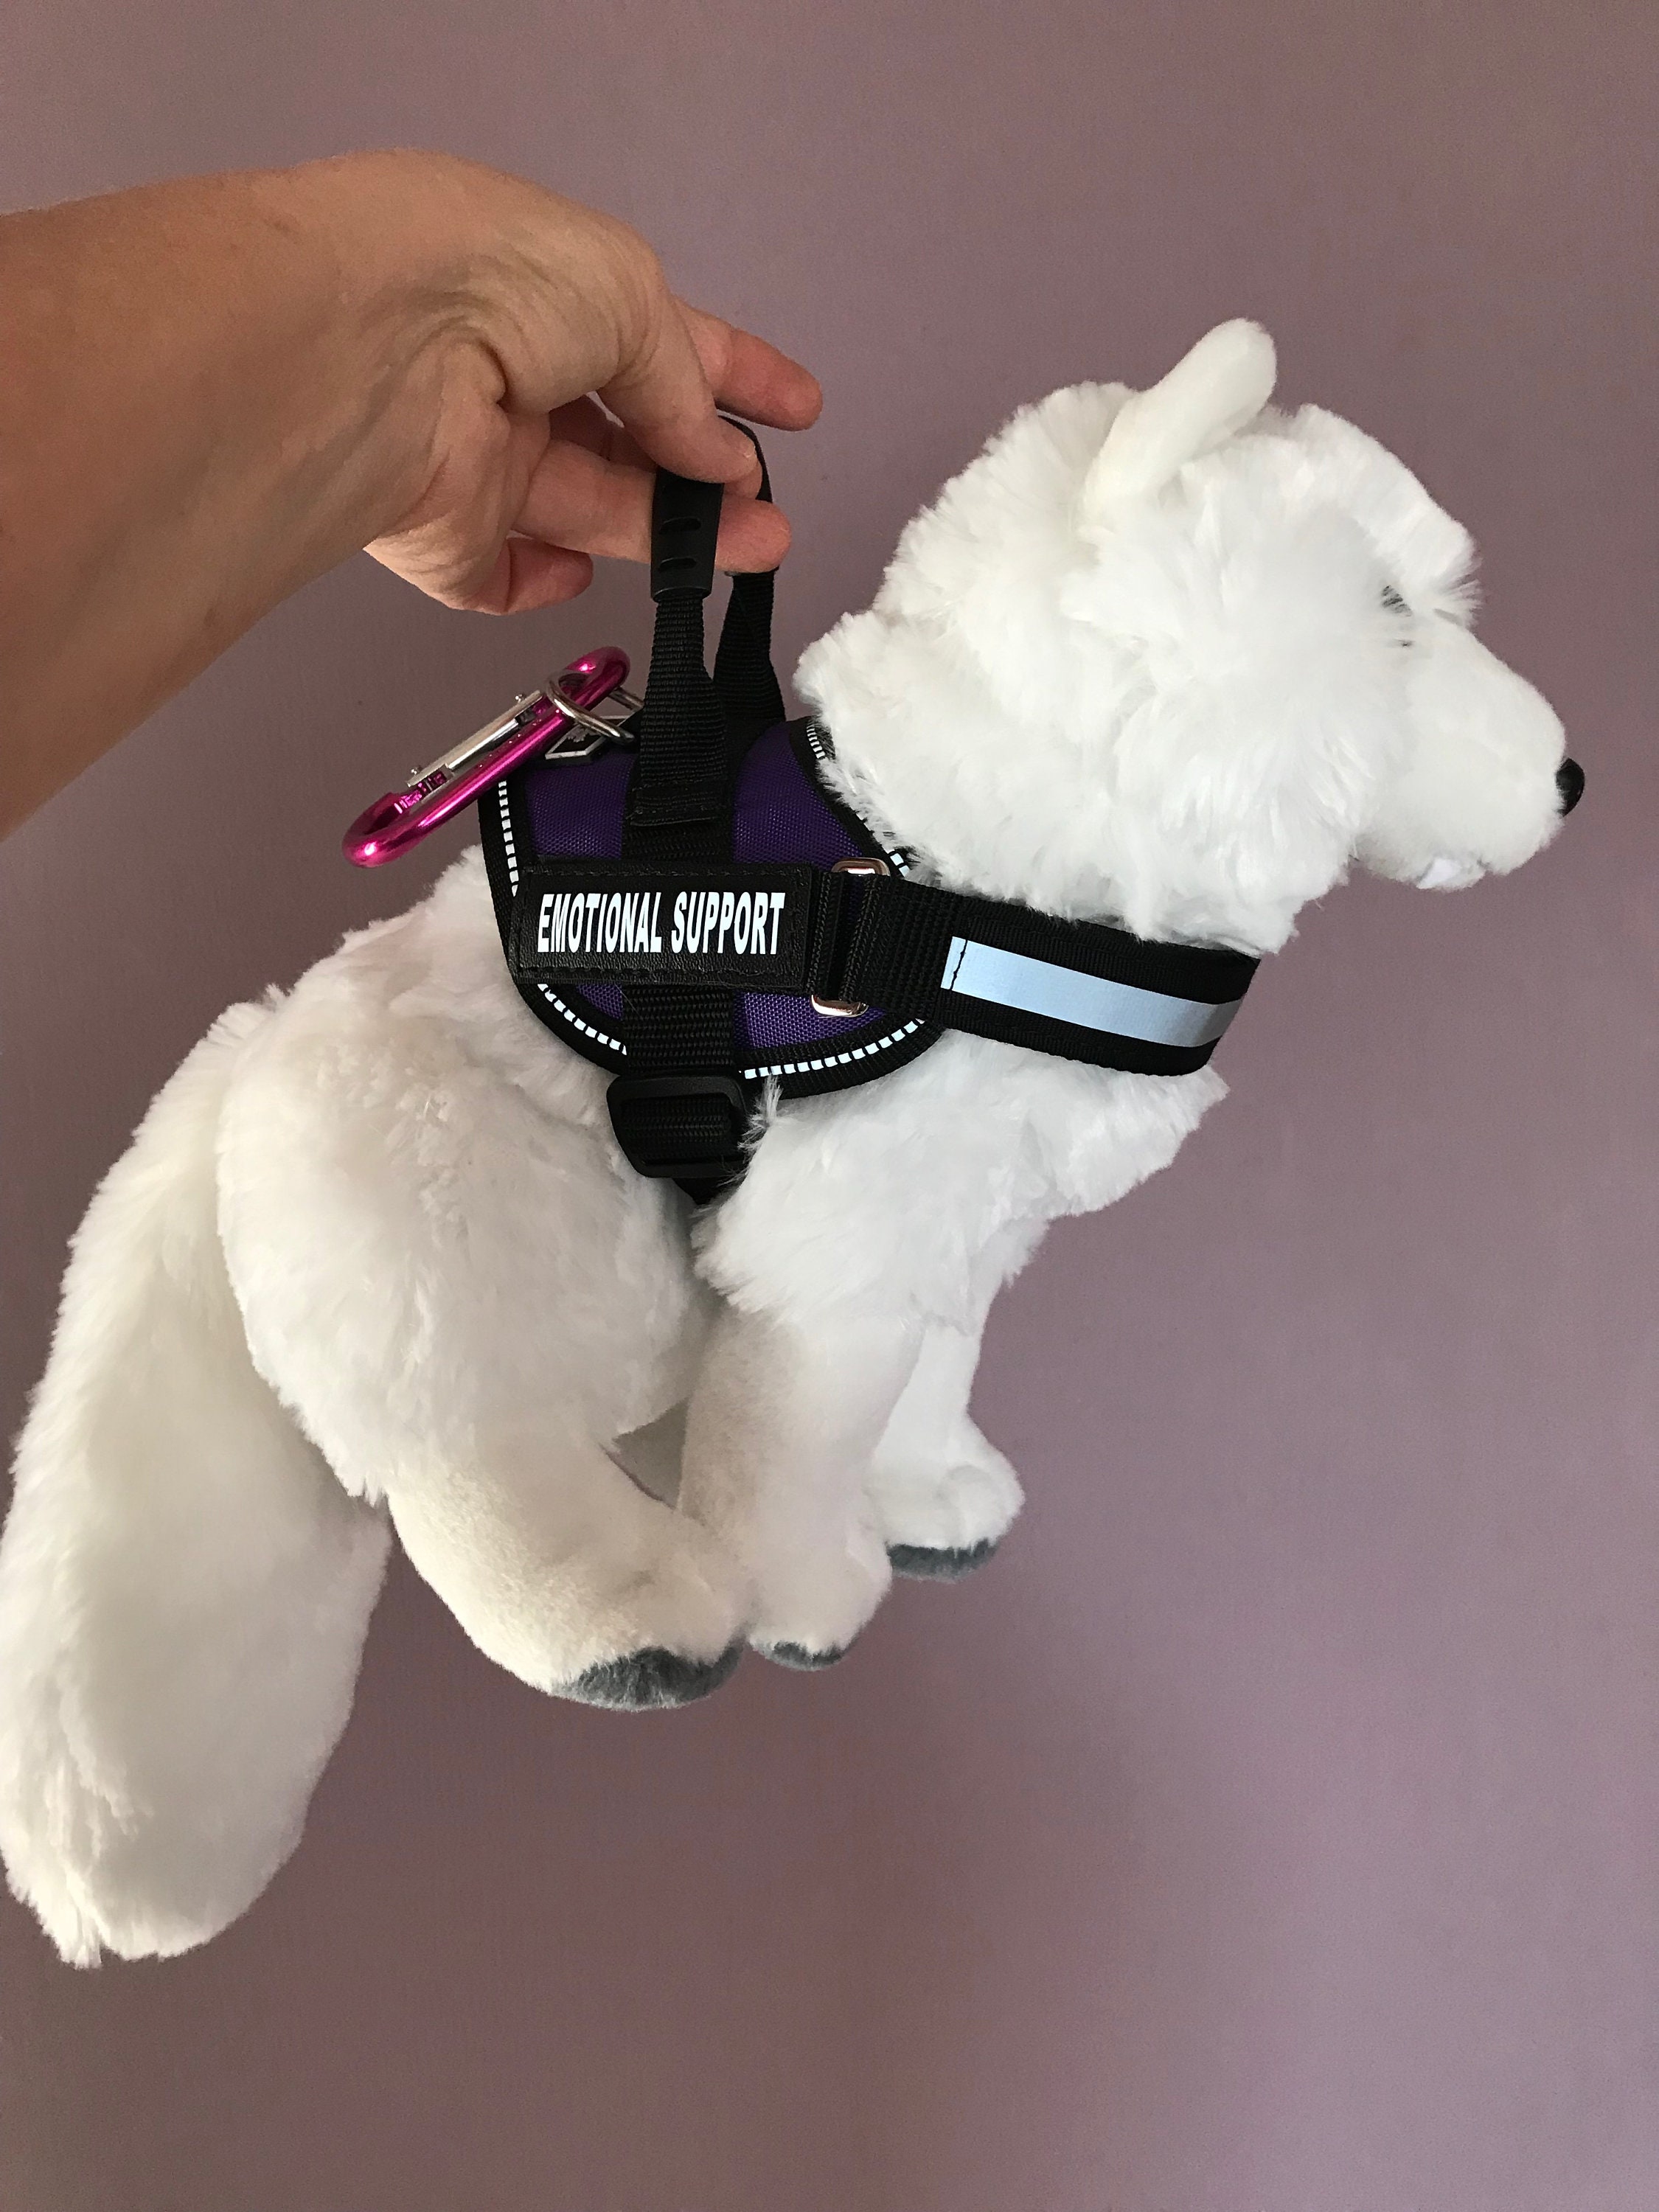 Emotional Support White Arctic Fox Plush Stuffed Animal Personalized Gift  Toy 